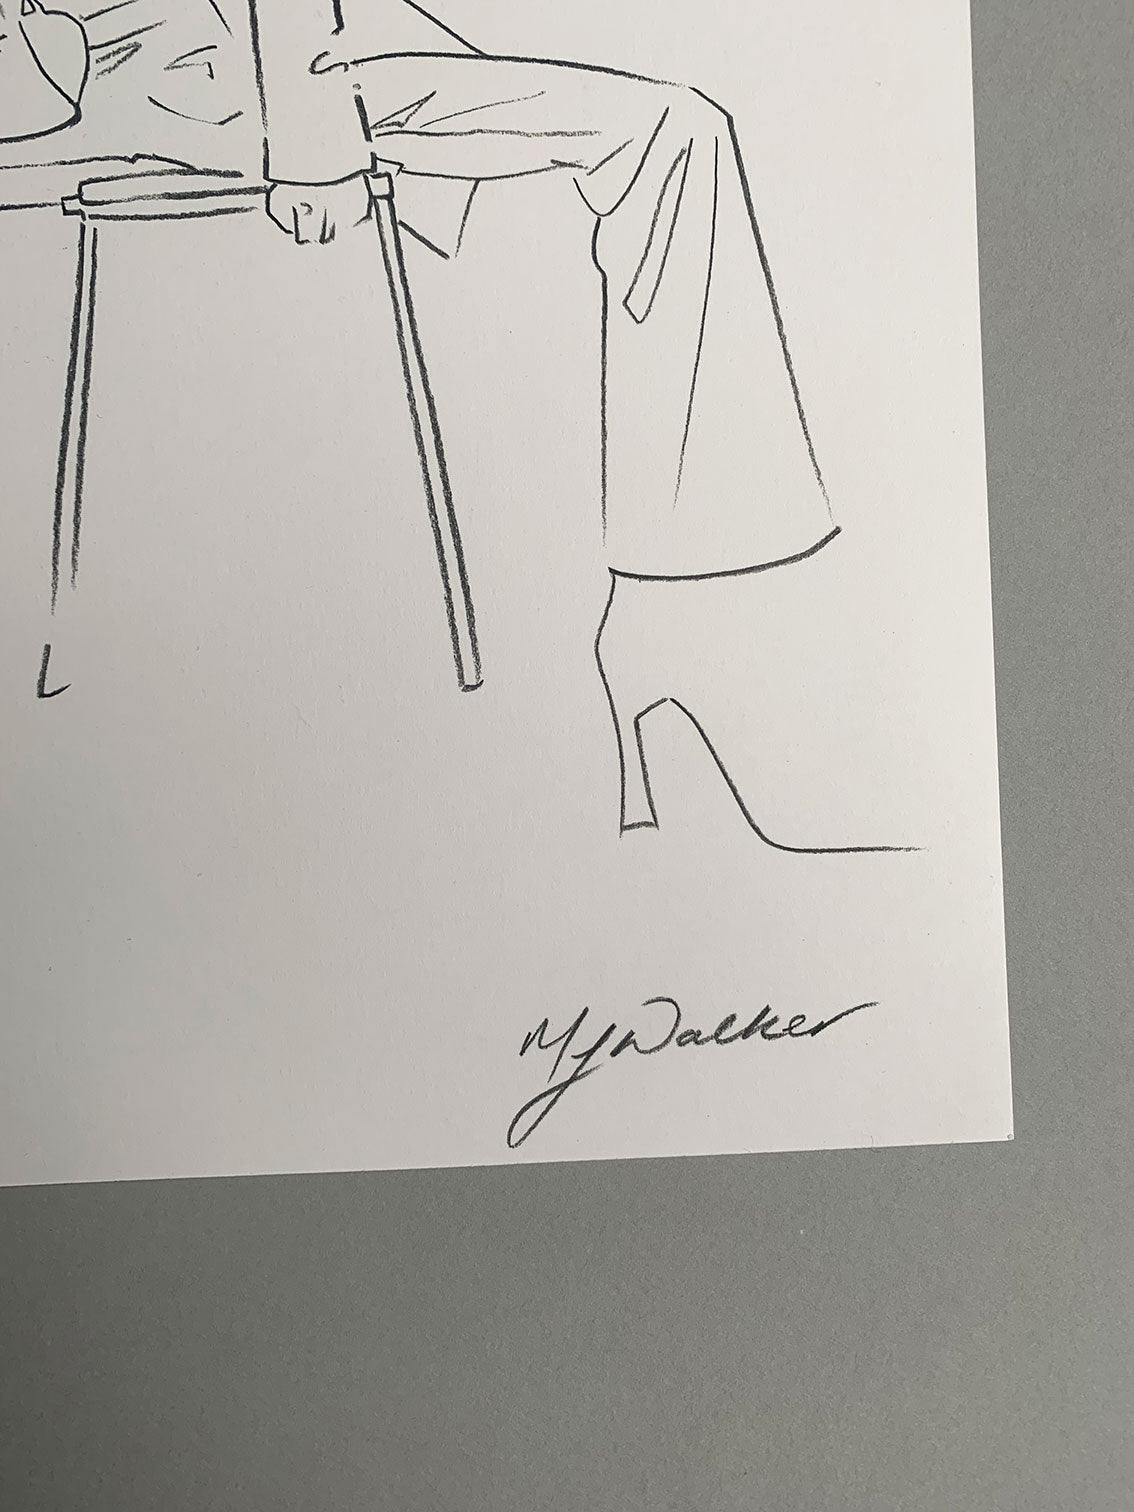 Melanie Walker's signature on a fashion illustration of a lady sitting on a stool.